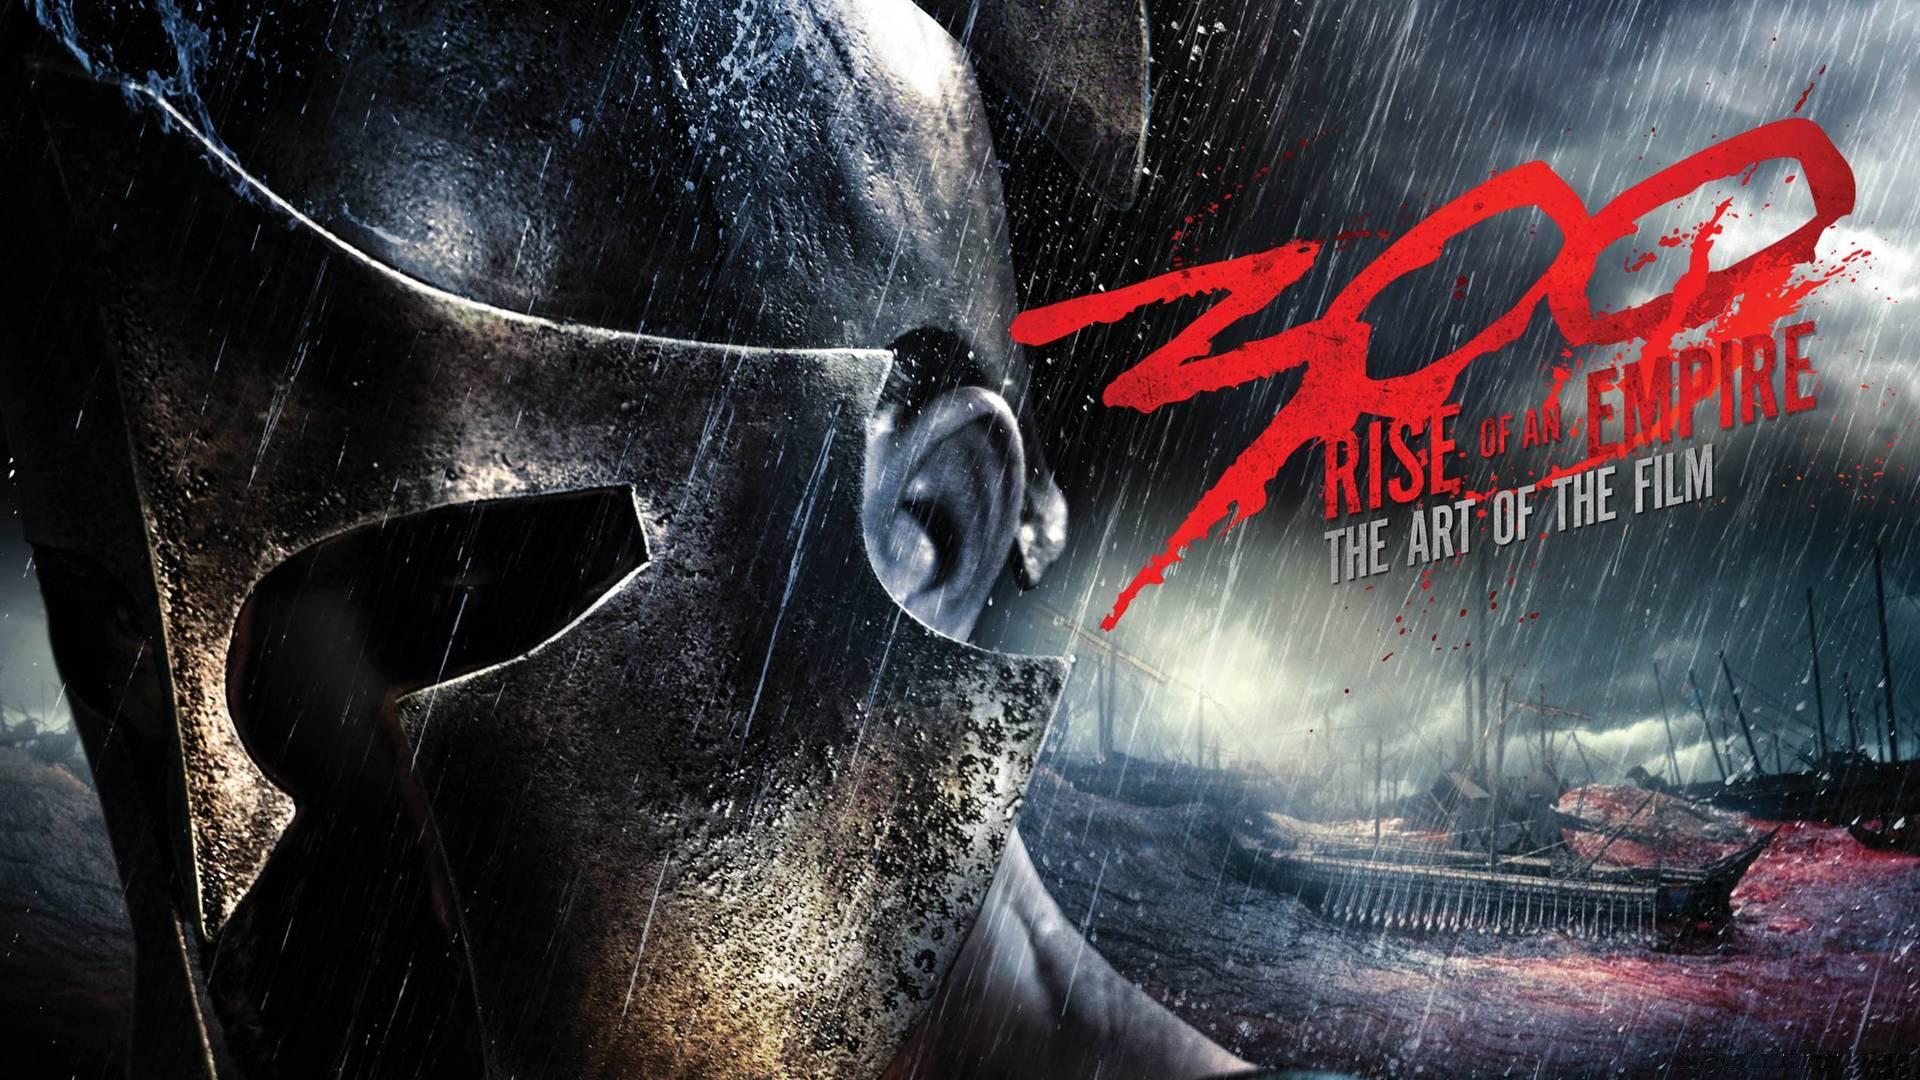 300 rise of an empire poster picture hd free download fabulous hd wallpapers of hollywood movies